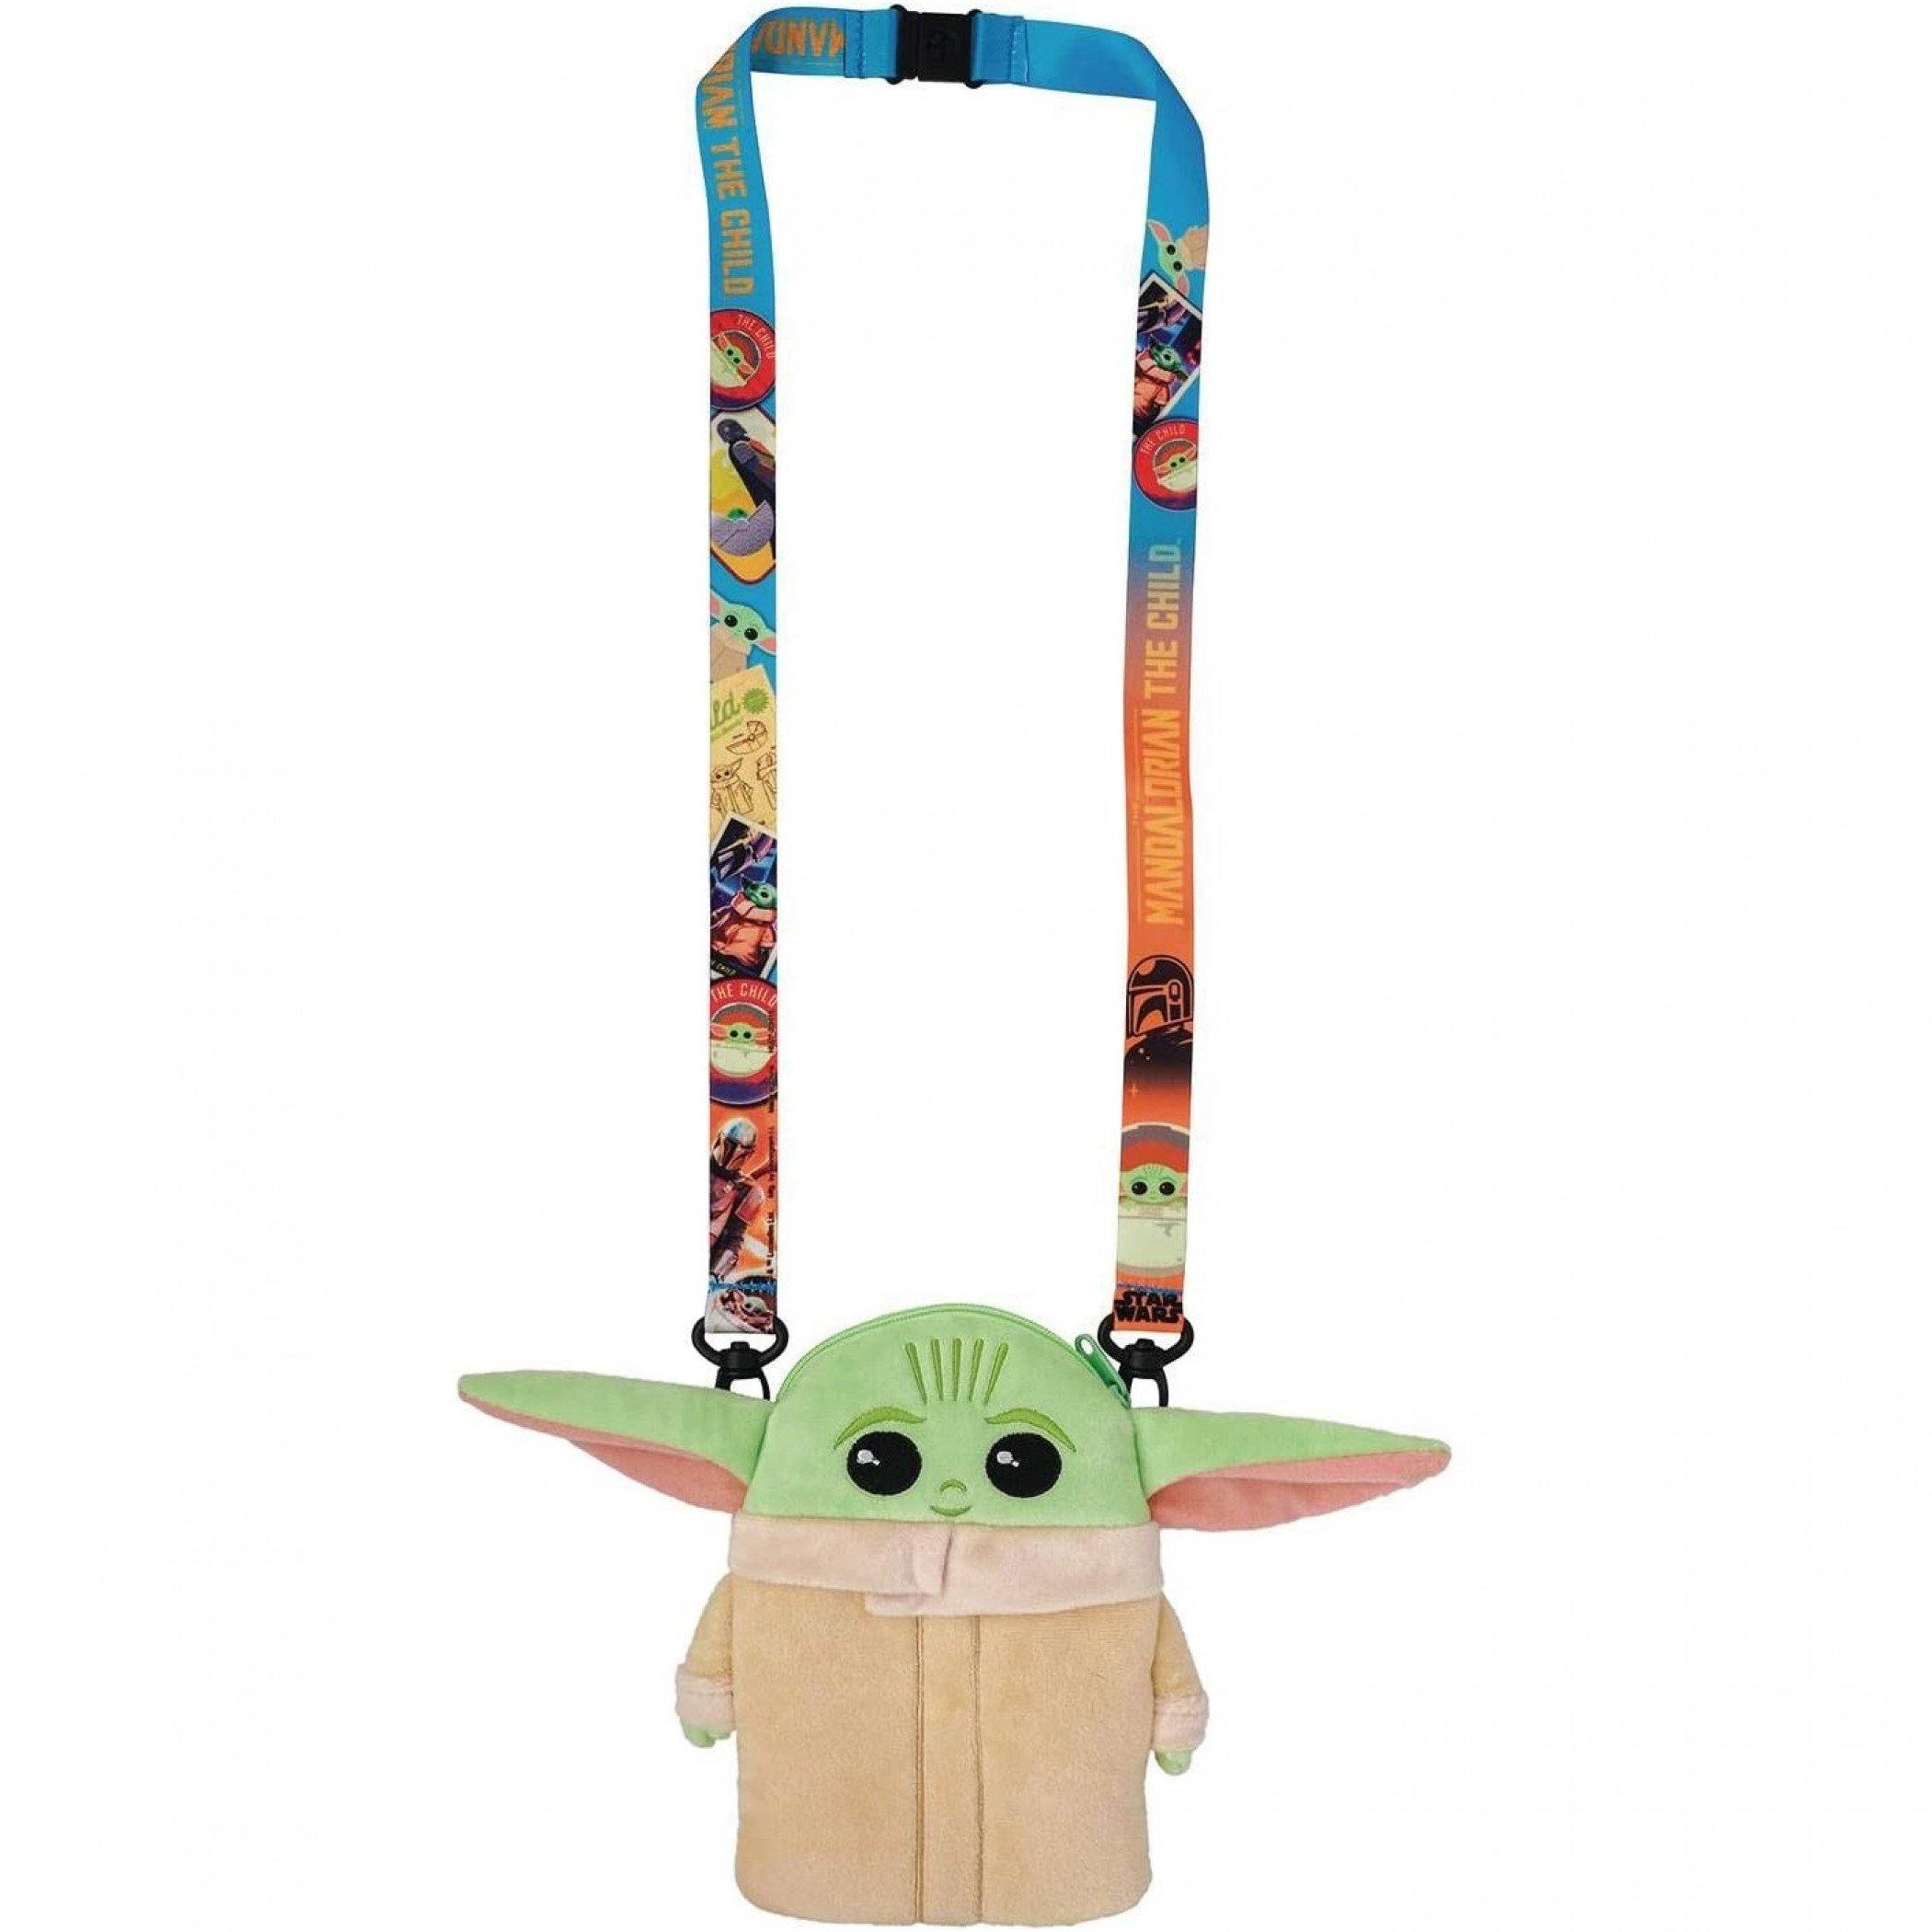 Star Wars The Child Plush Lanyard with Pouch